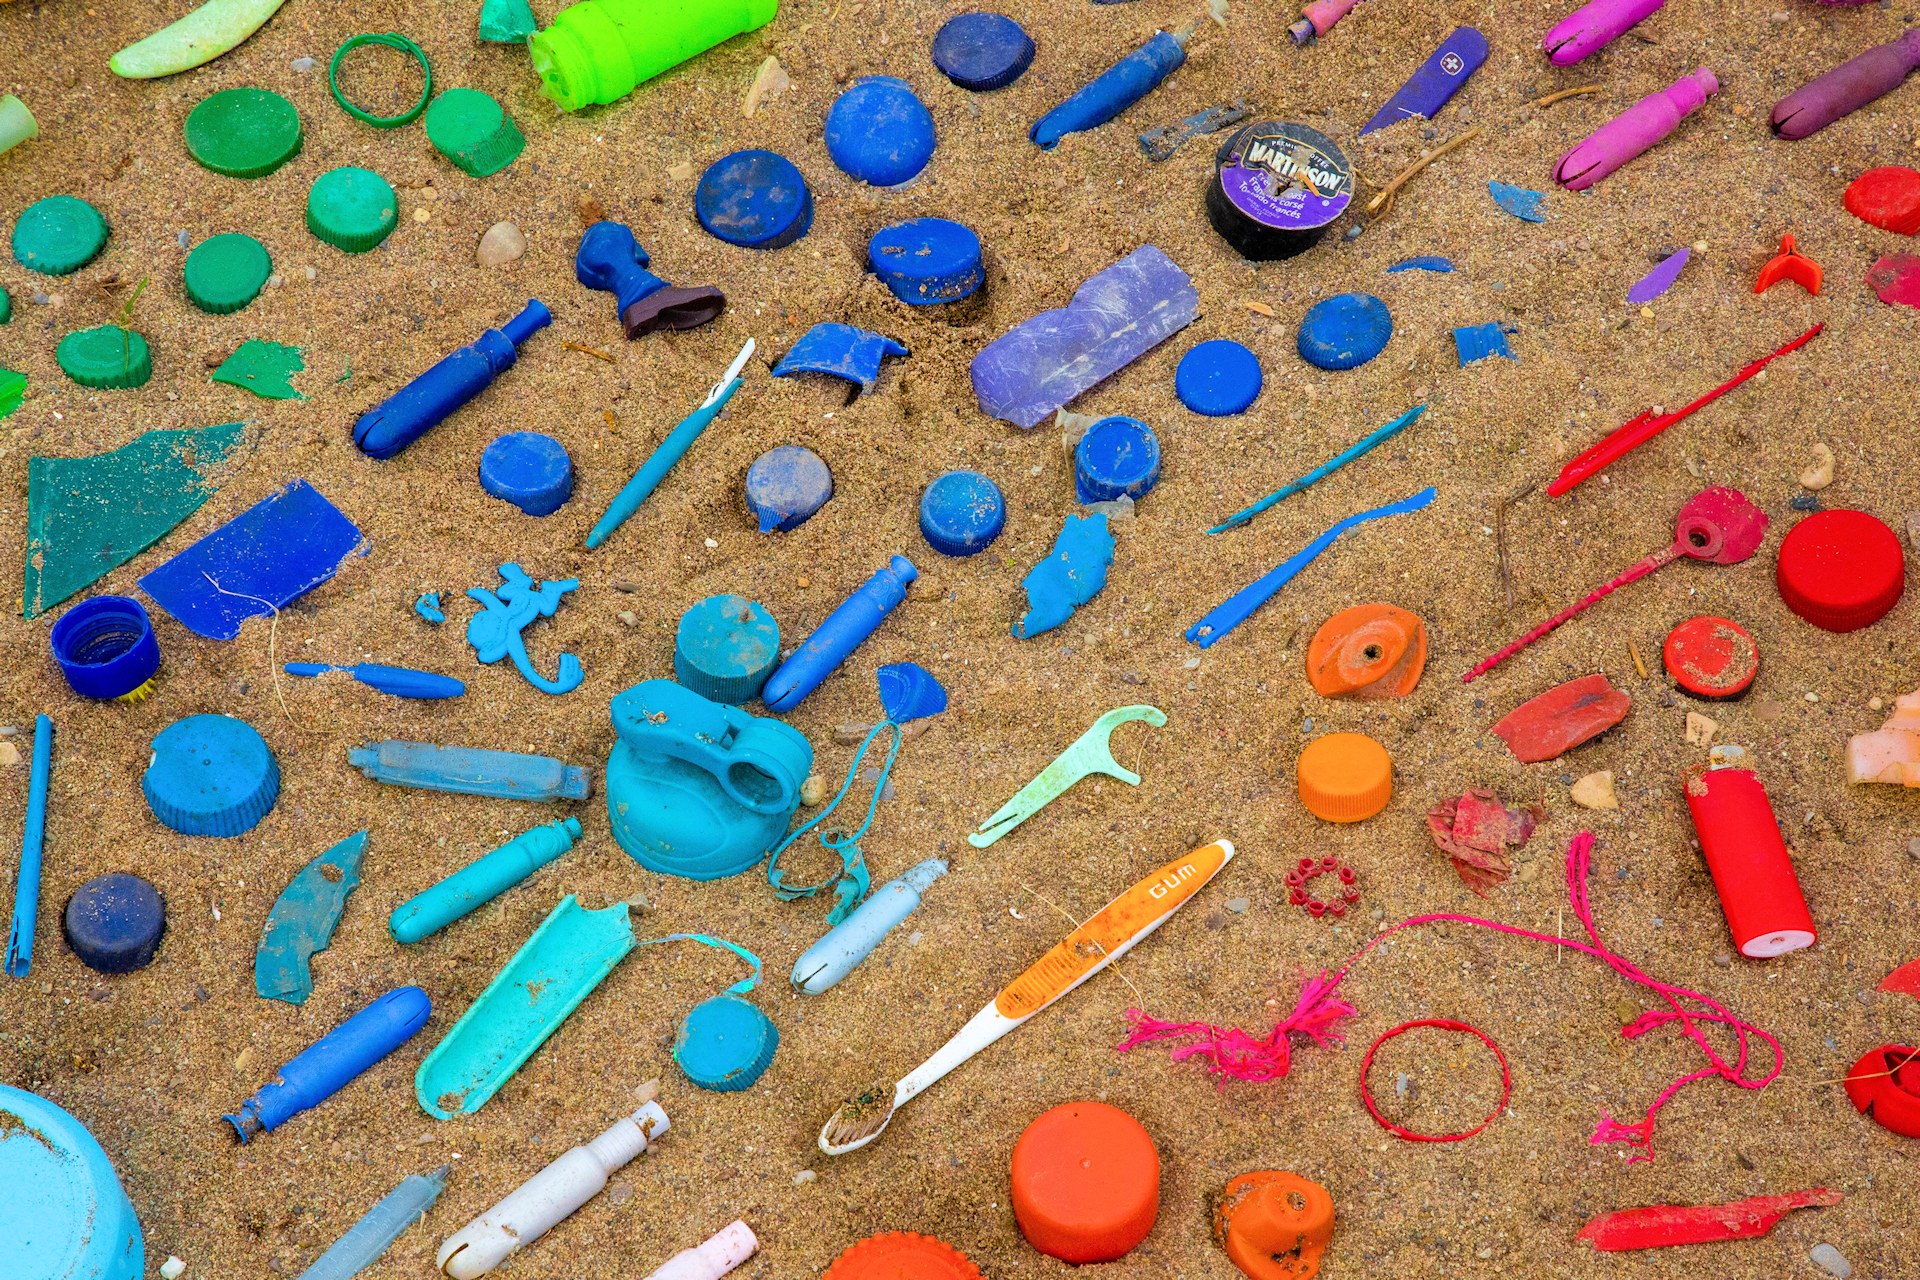 Beach plastic trash sorted by colors